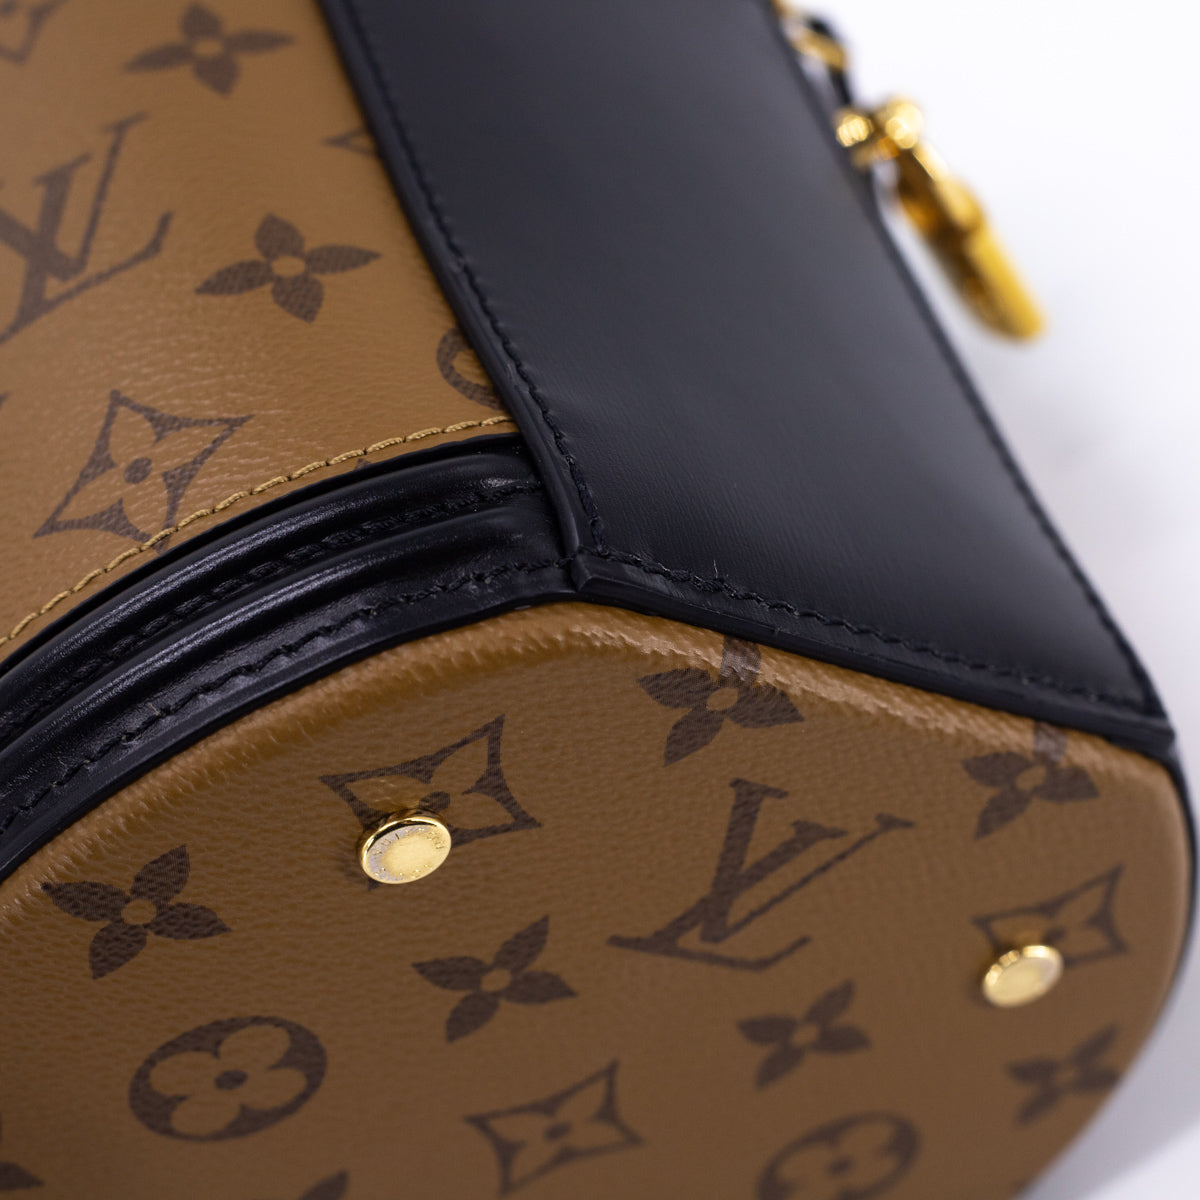 LOUIS VUITTON DOCTORS BAG WITH COMPLETE INCLUSIONS